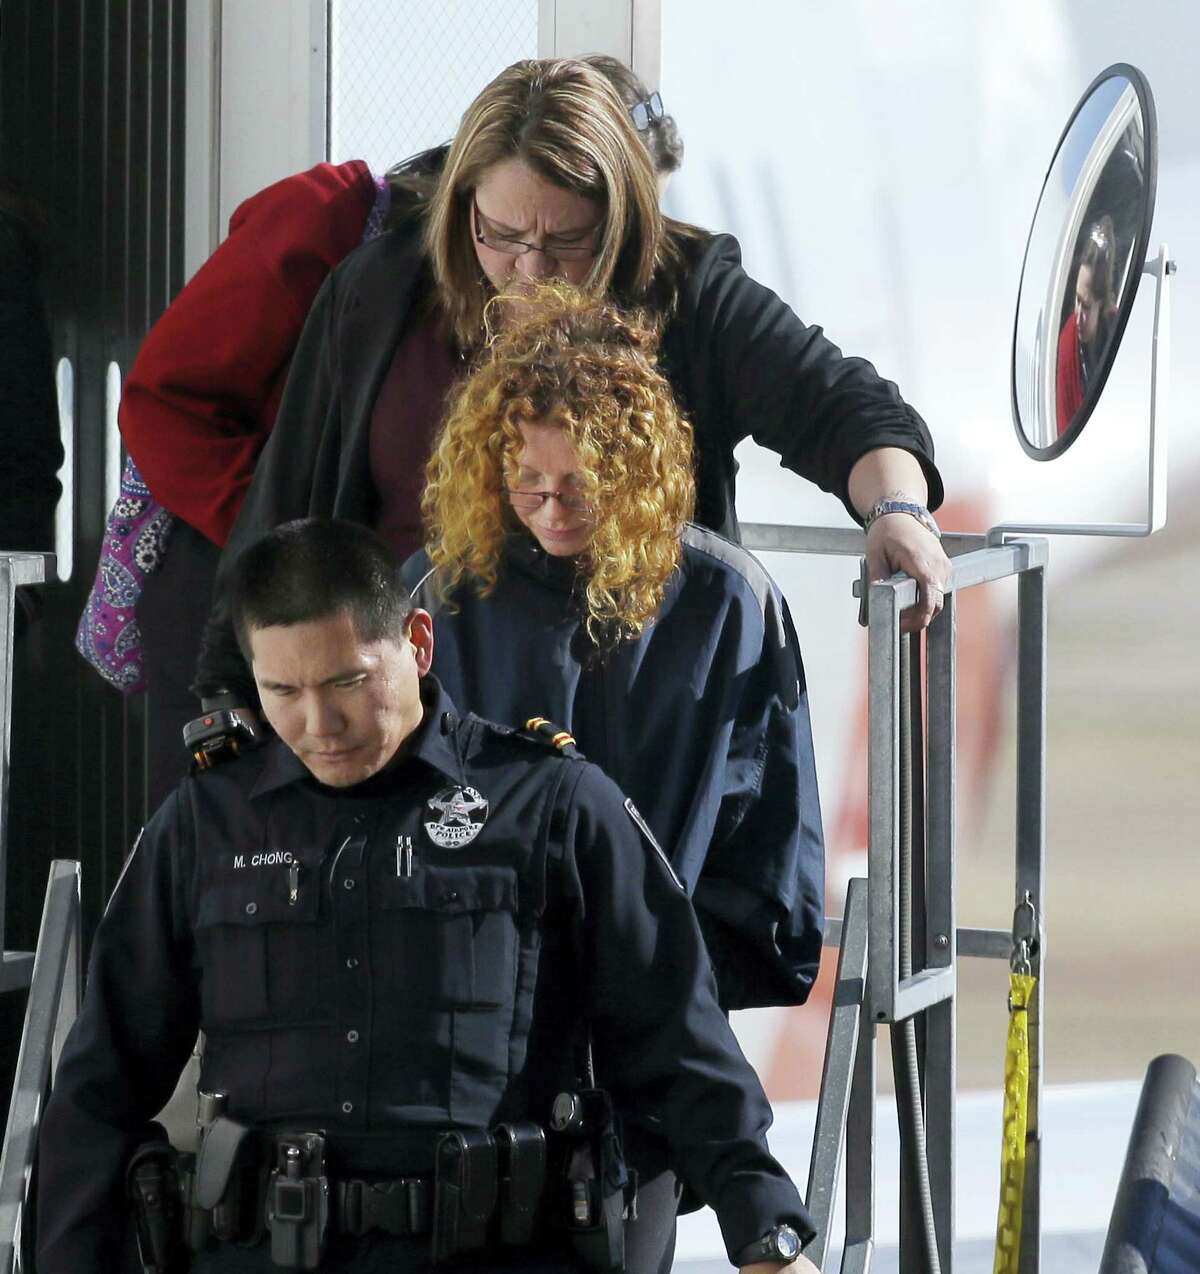 Tonya Couch is escorted off a flight after her arrival to the Dallas/Fort Worth International Airport in Grapevine, Texas, Thursday, Jan. 7, 2016. Couch, mother of a fugitive teenager known for using an “affluenza” defense in a deadly drunken-driving case, waived extradition and was sent to Texas from California to face a charge of hindering the apprehension of a felon.